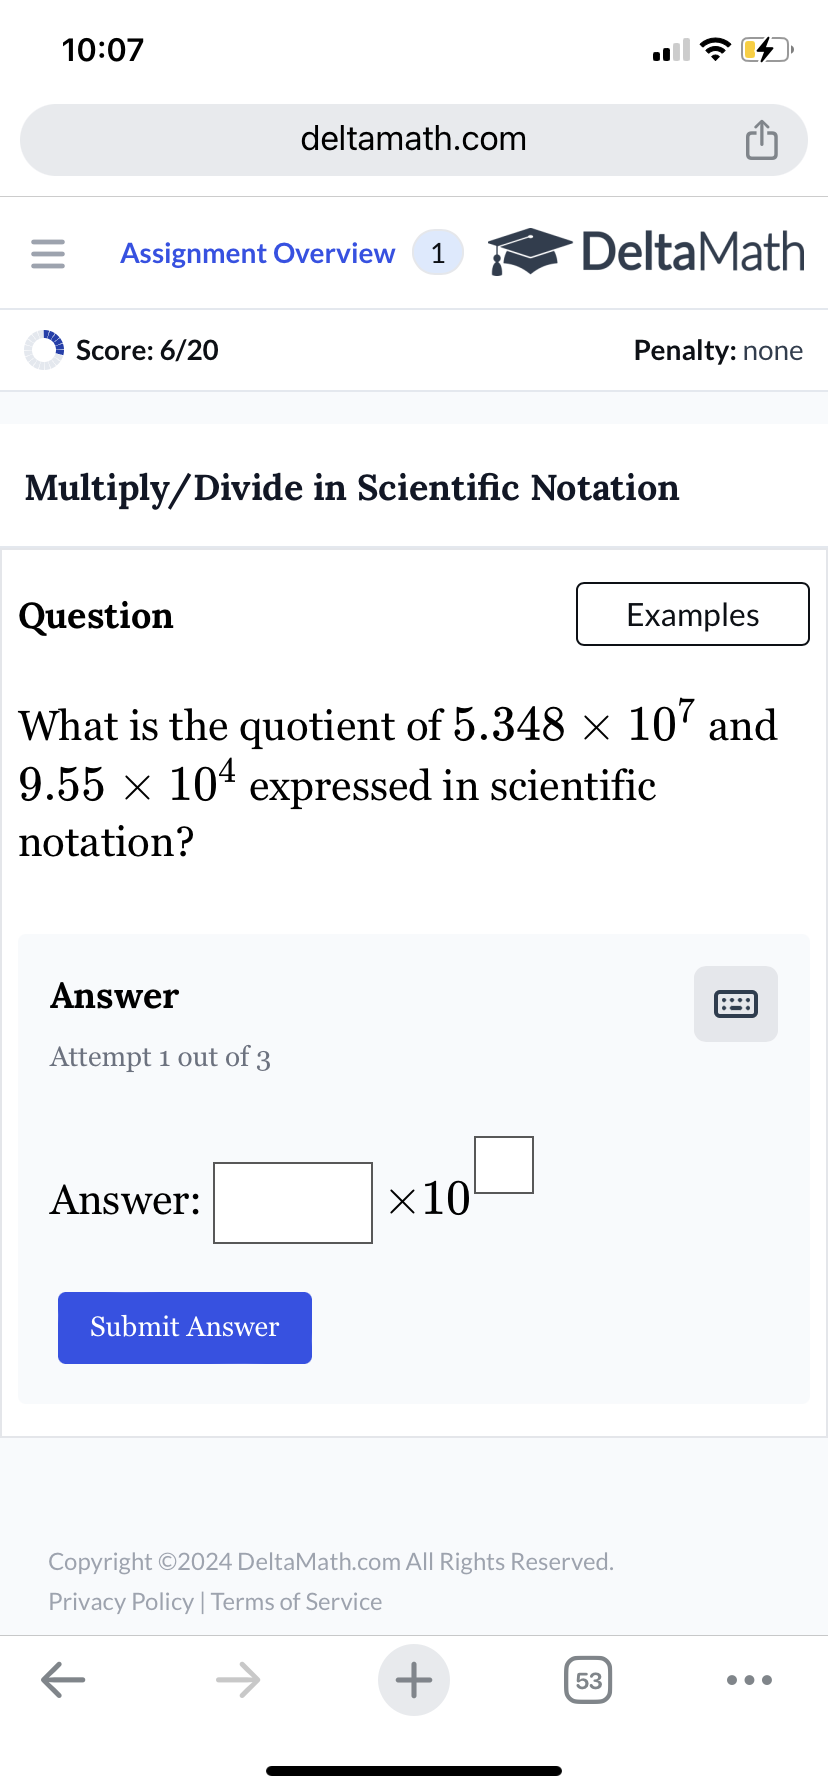 10:07
deltamath.com
= Assignment Overview 1
DeltaMath
Score: 6/20
Penalty: none
Multiply/Divide in Scientific Notation
Question
Examples
What is the quotient of 5.348 × 107 and
9.55 x 10 expressed in scientific
notation?
Answer
Attempt 1 out of 3
Answer:
Submit Answer
×10
Copyright ©2024 DeltaMath.com All Rights Reserved.
Privacy Policy | Terms of Service
←
+
53